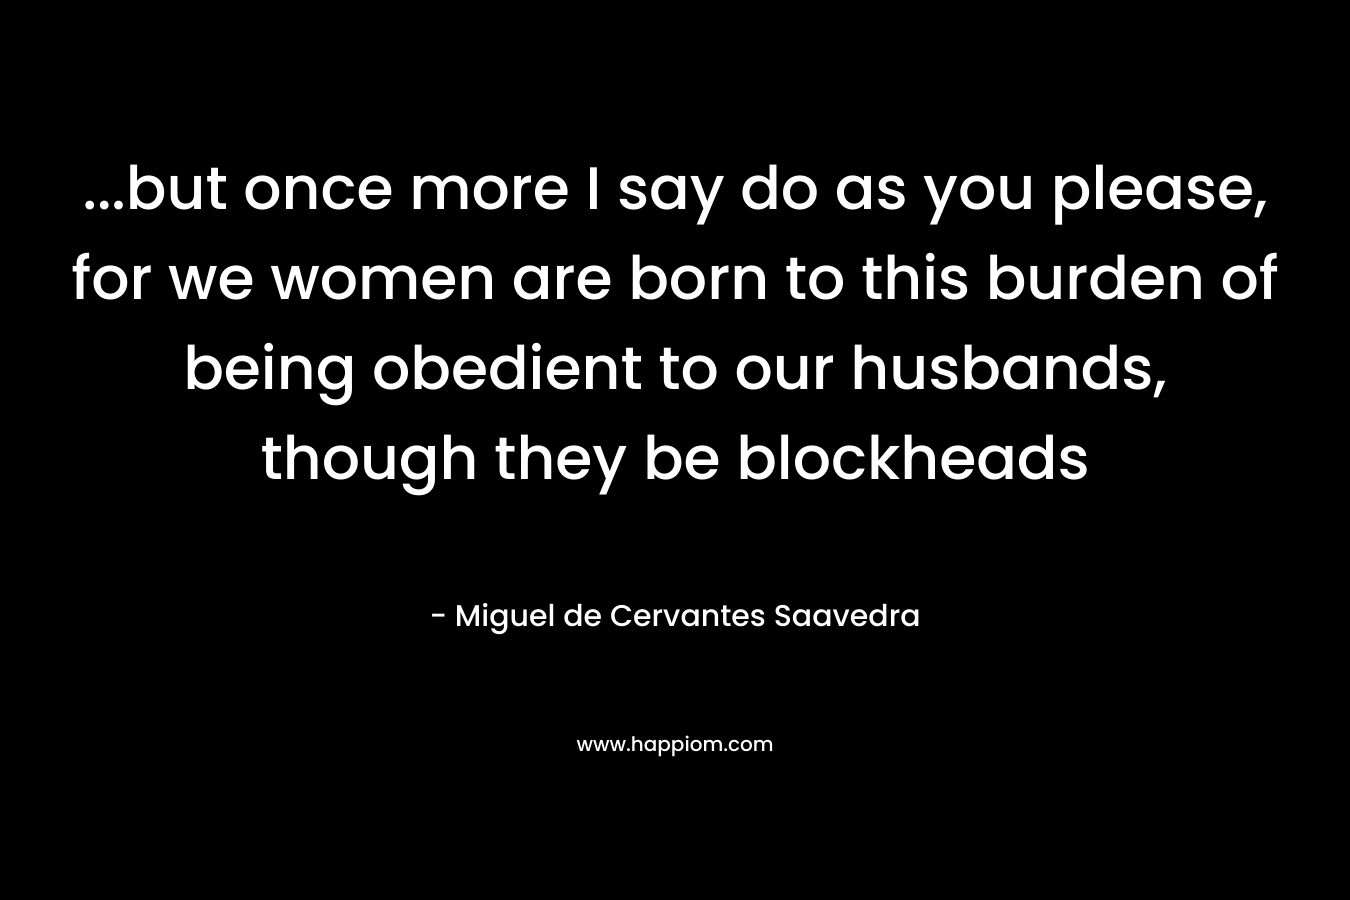 ...but once more I say do as you please, for we women are born to this burden of being obedient to our husbands, though they be blockheads